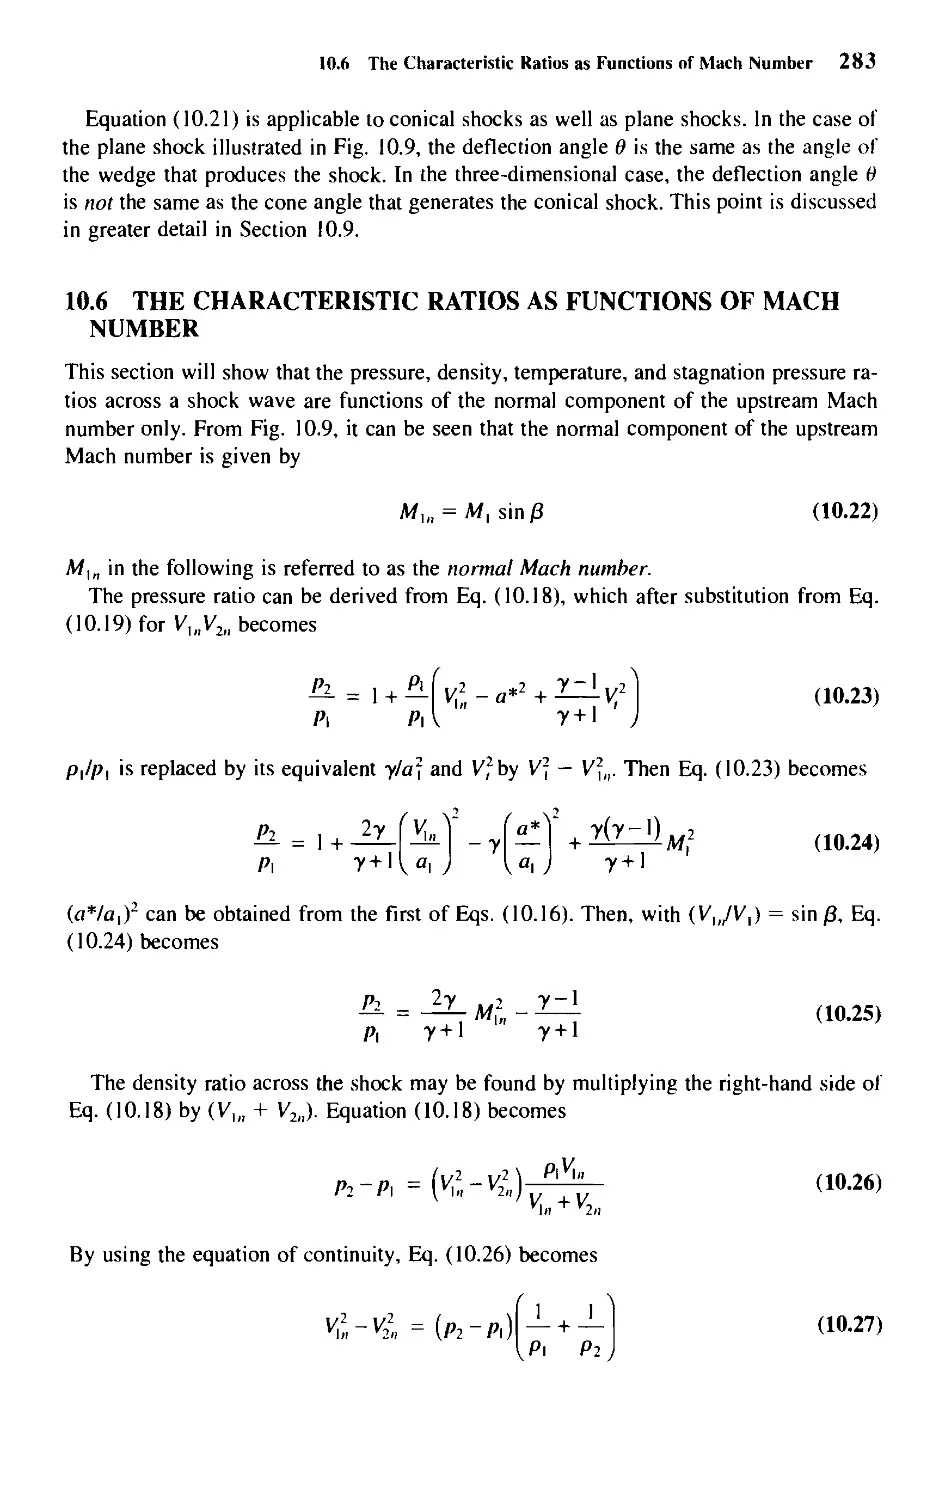 10.6 - The Characteristic Ratios as Functions of Mach Number